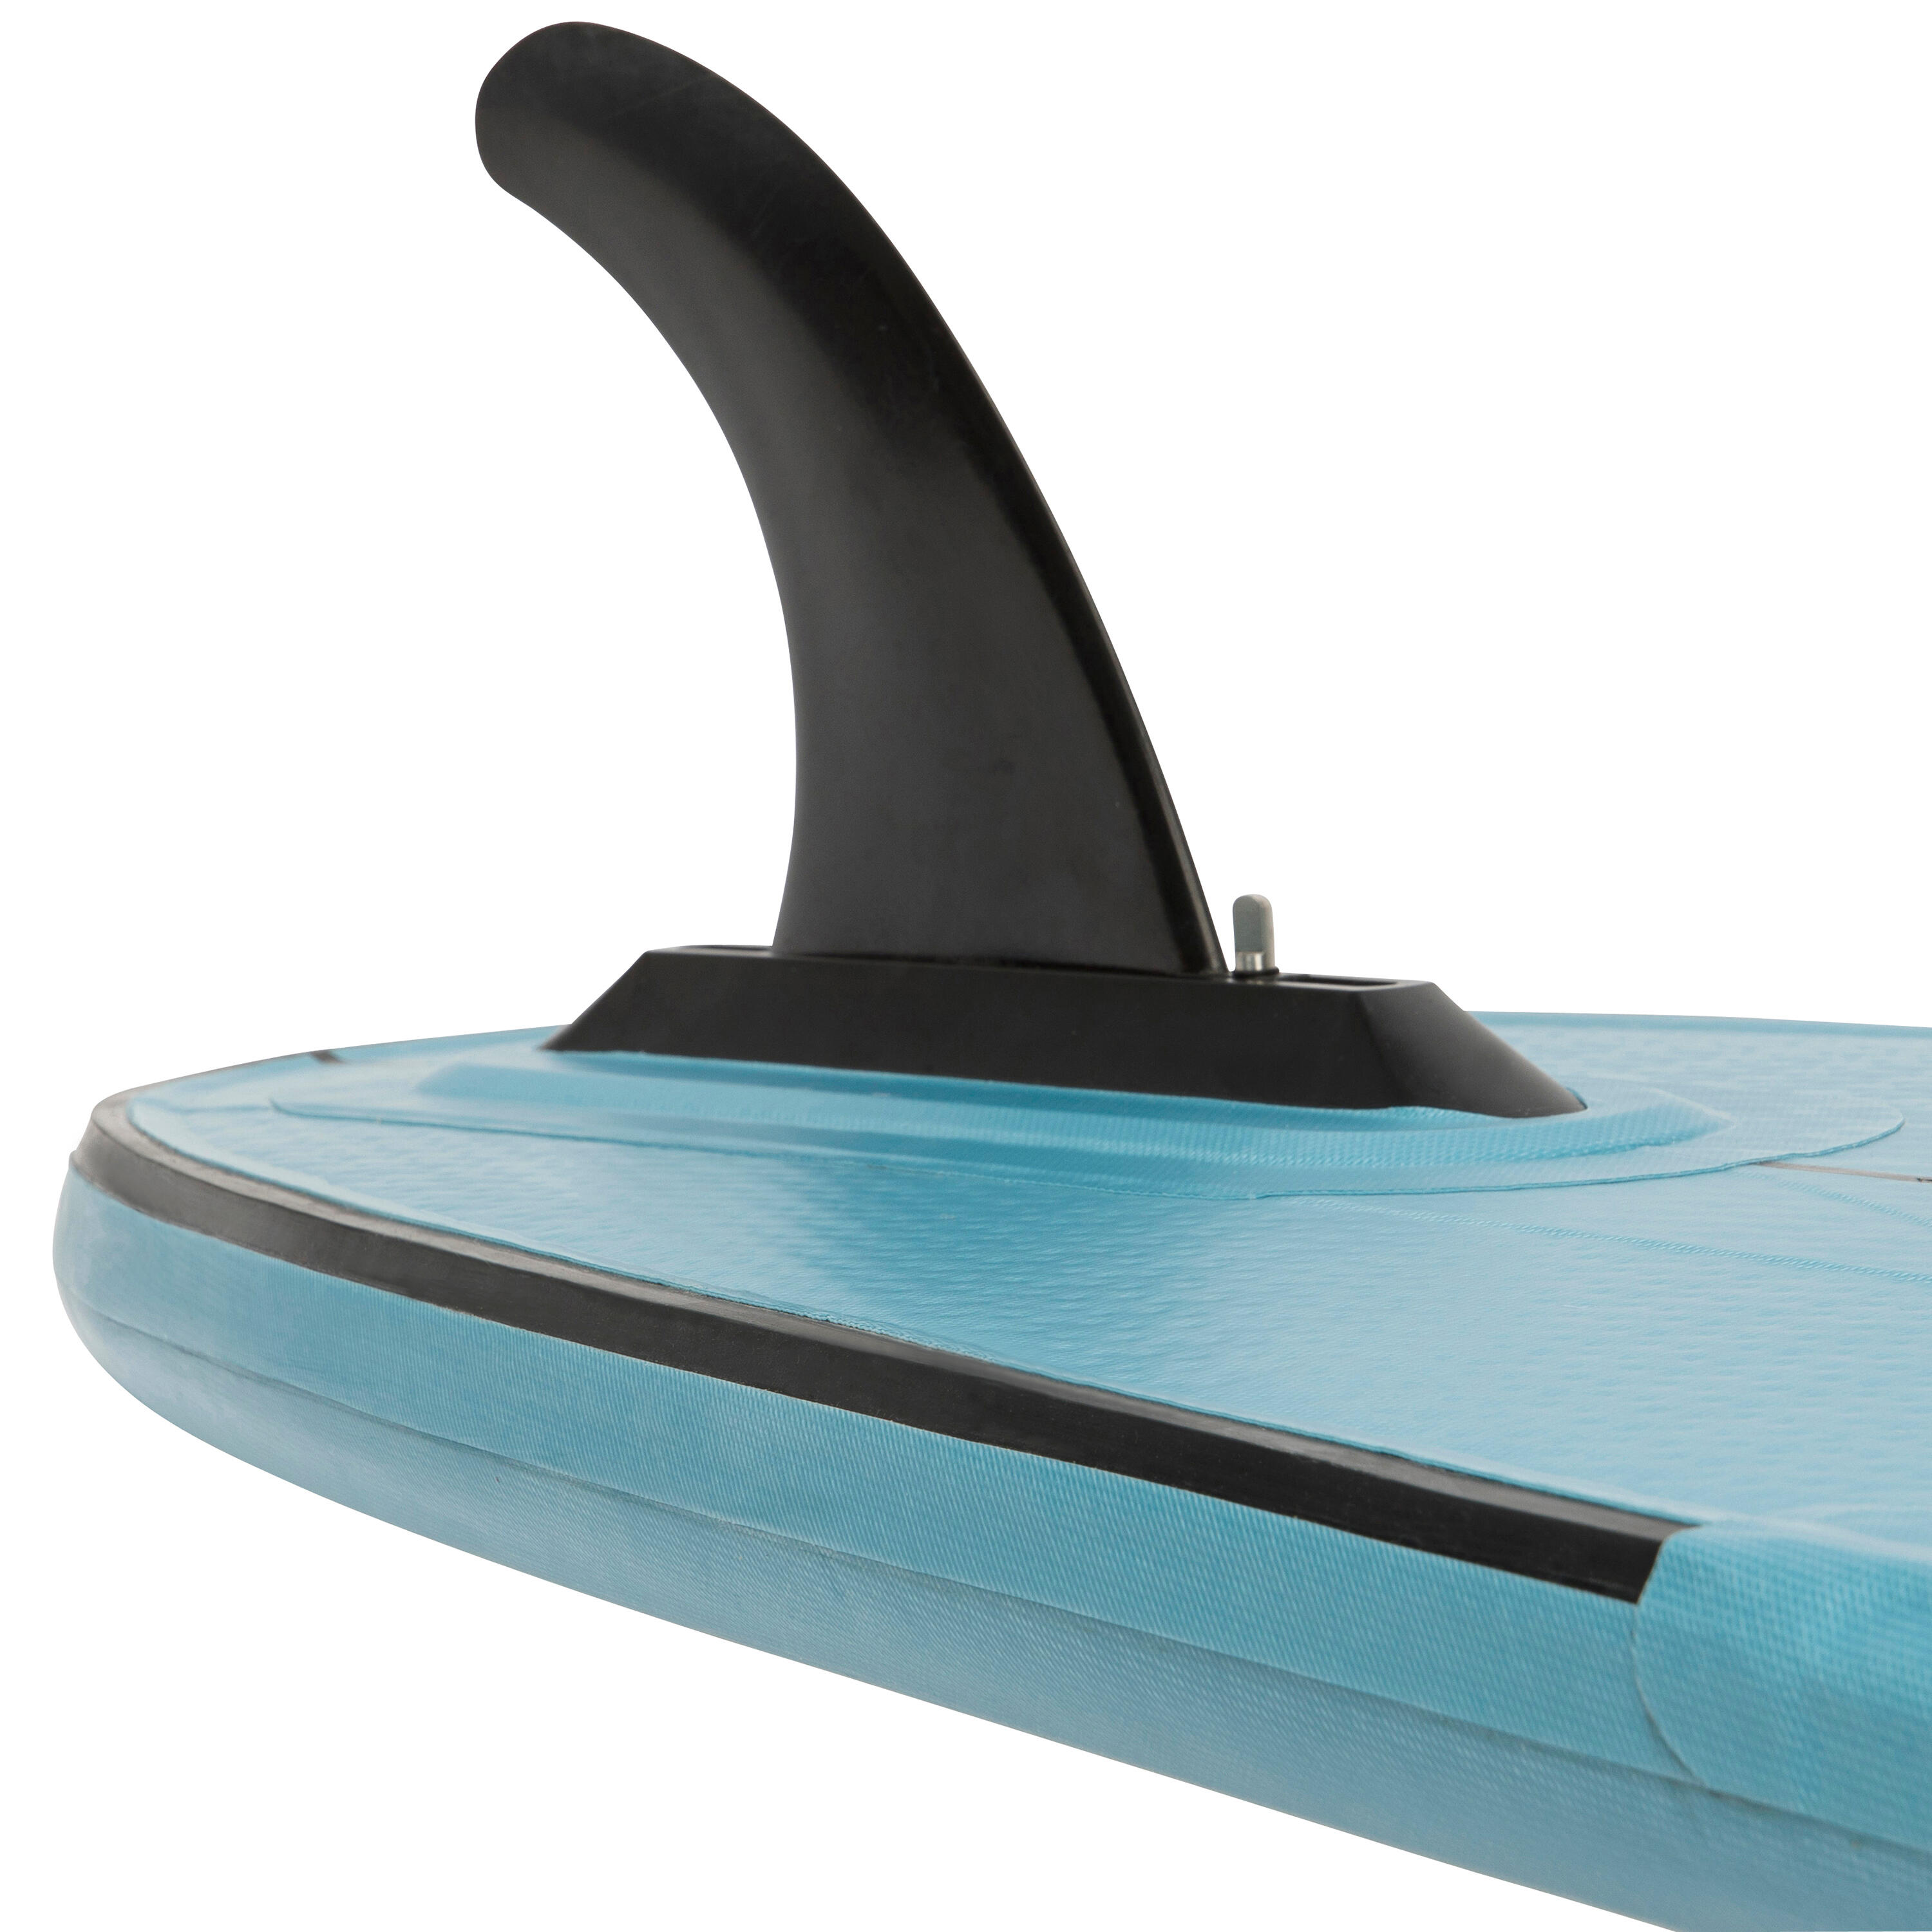 Compact inflatable surfboard 500 6'6” (without pump or leash) 4/14